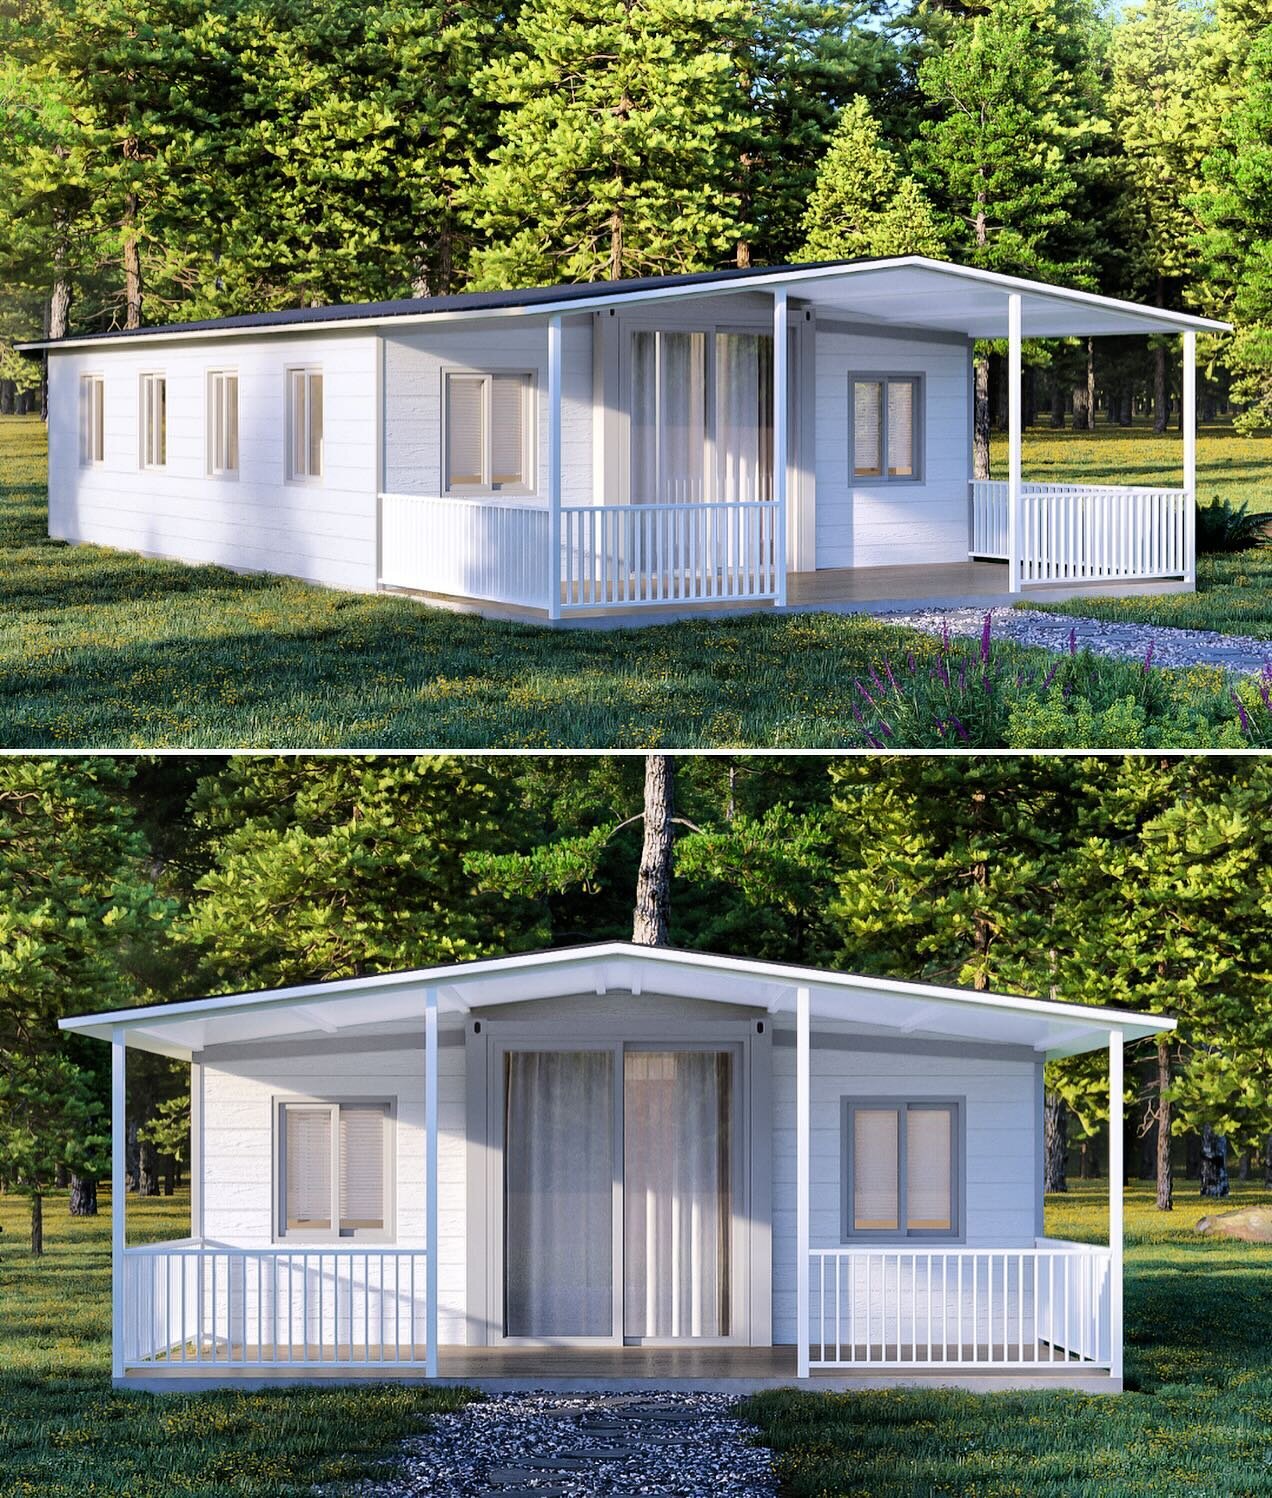 Introducing the new 30ft Expander: the future of spacious, yet compact living. Designed for those who demand both style and functionality, this latest innovation offers an ideal balance of comfort and convenience. Ready to be set up in under a day, i